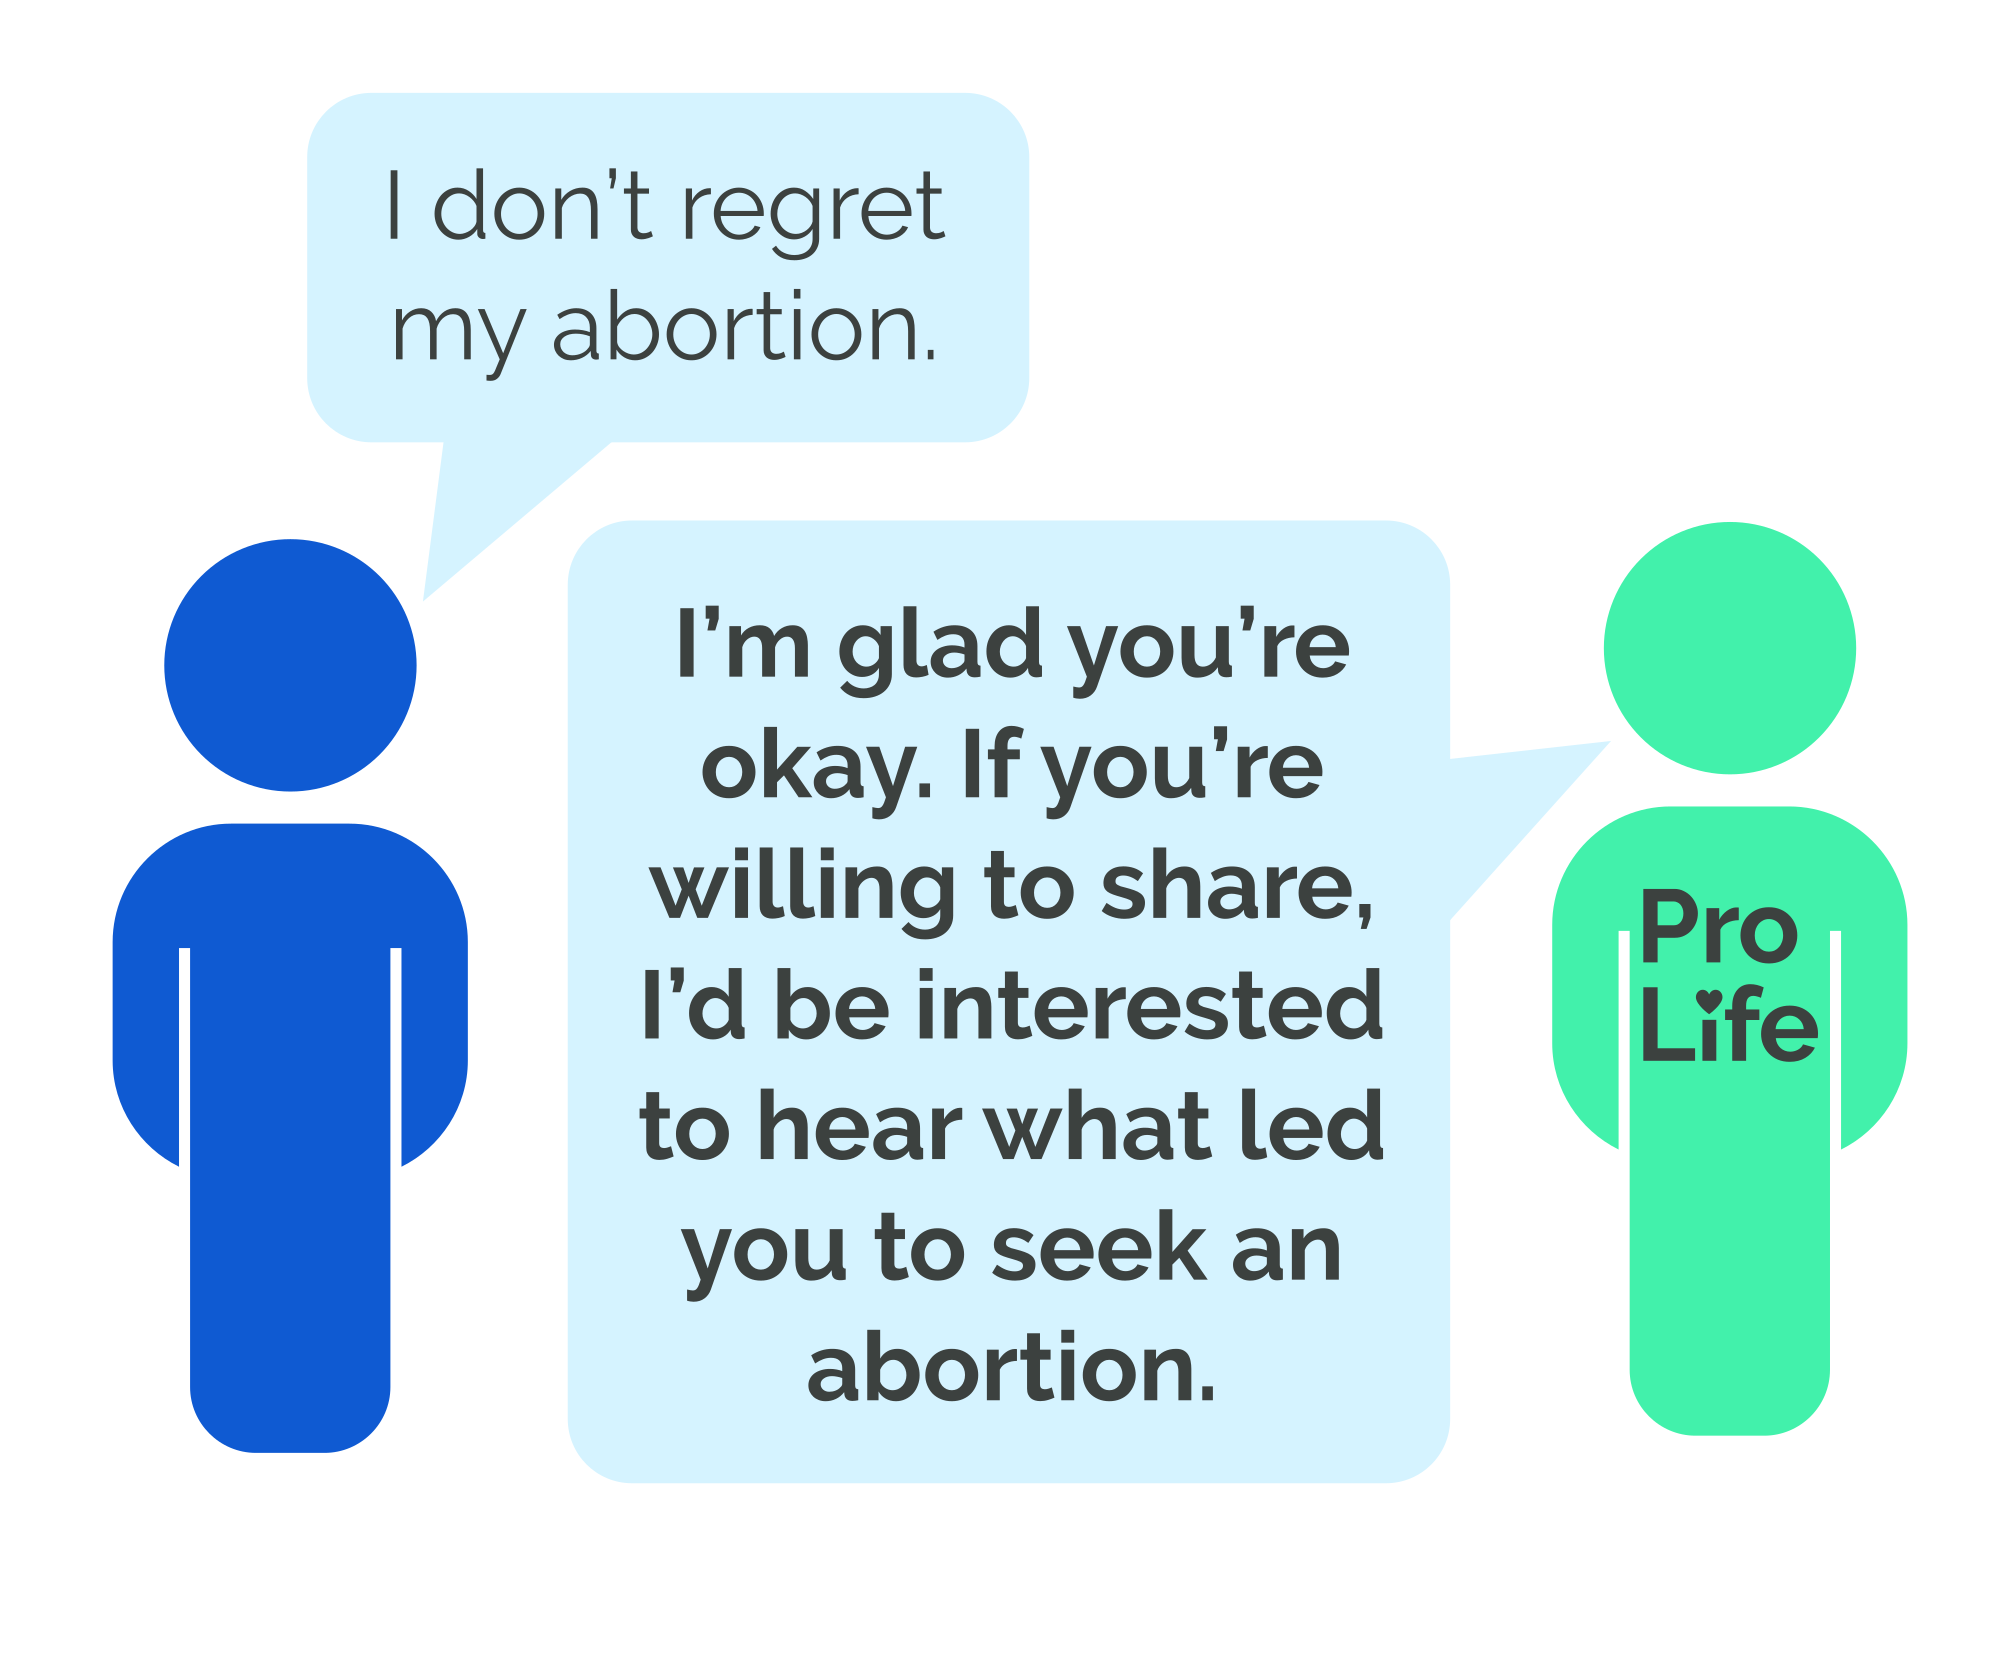 Person 1: I don’t regret my abortion. Person 2 (our hero): I’m glad you’re okay. If you’re willing to share, I’d be interested to hear what led you to seek an abortion.